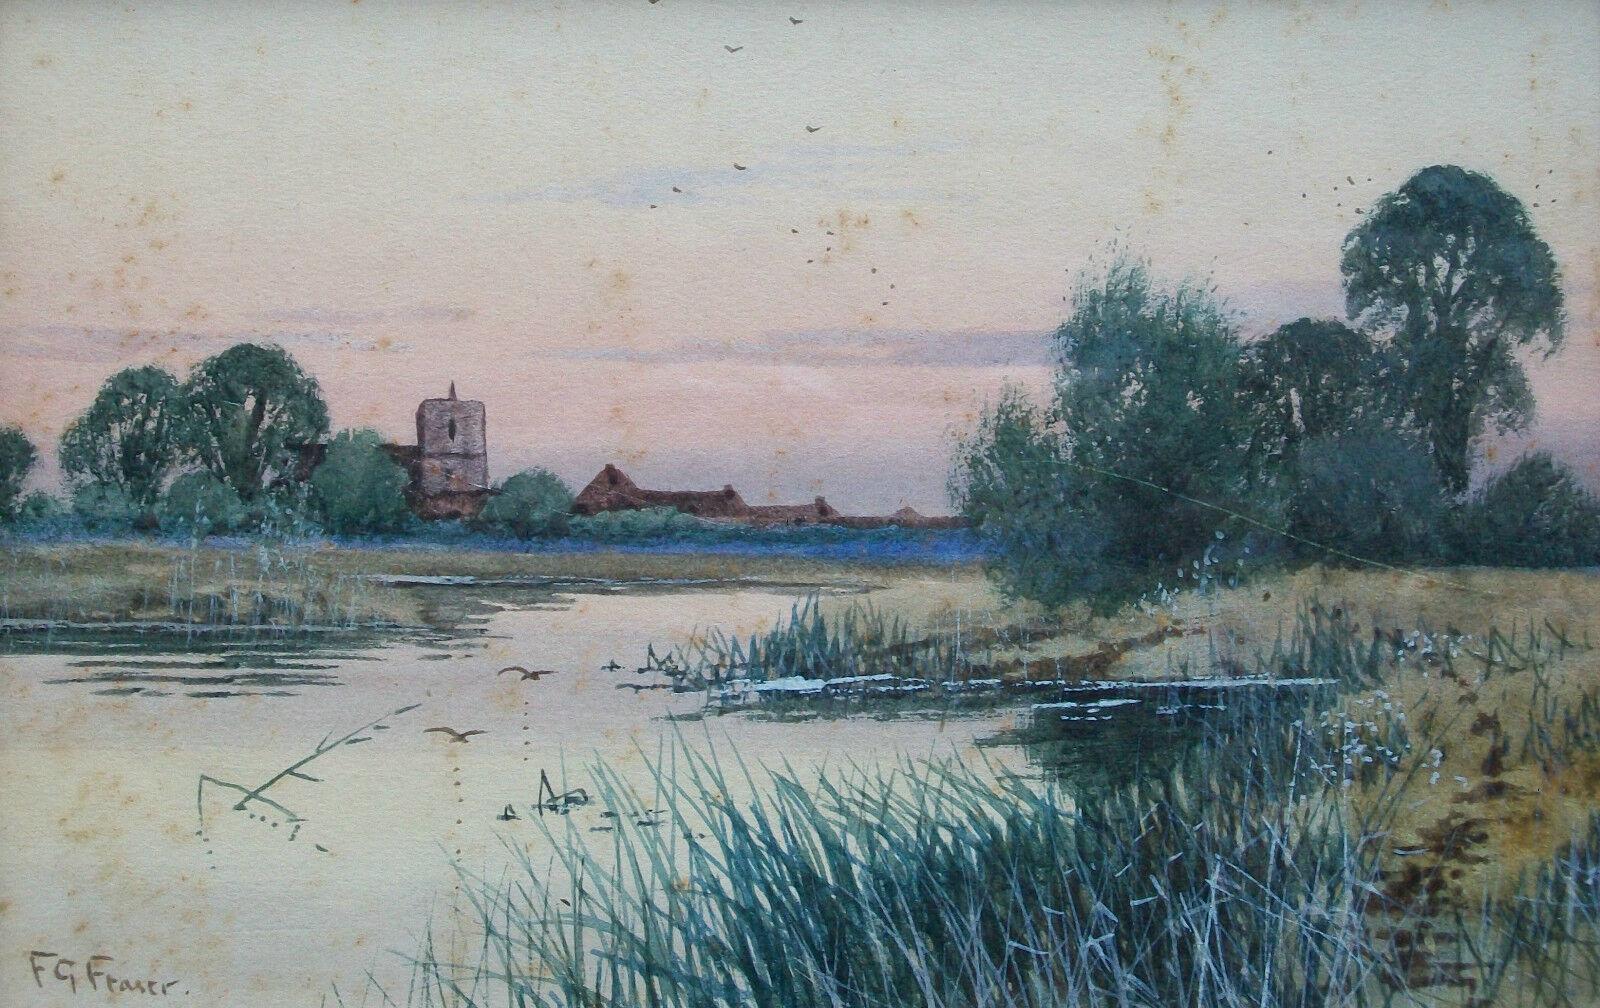 F.G. FRASER (Frederick Gordon Fraser) - Antique fine quality Cambridge spring/summer river view - watercolor and gouache painting on watercolor paper - signed by the artist lower left - contained in a late 19th/early 20th century hardwood frame with